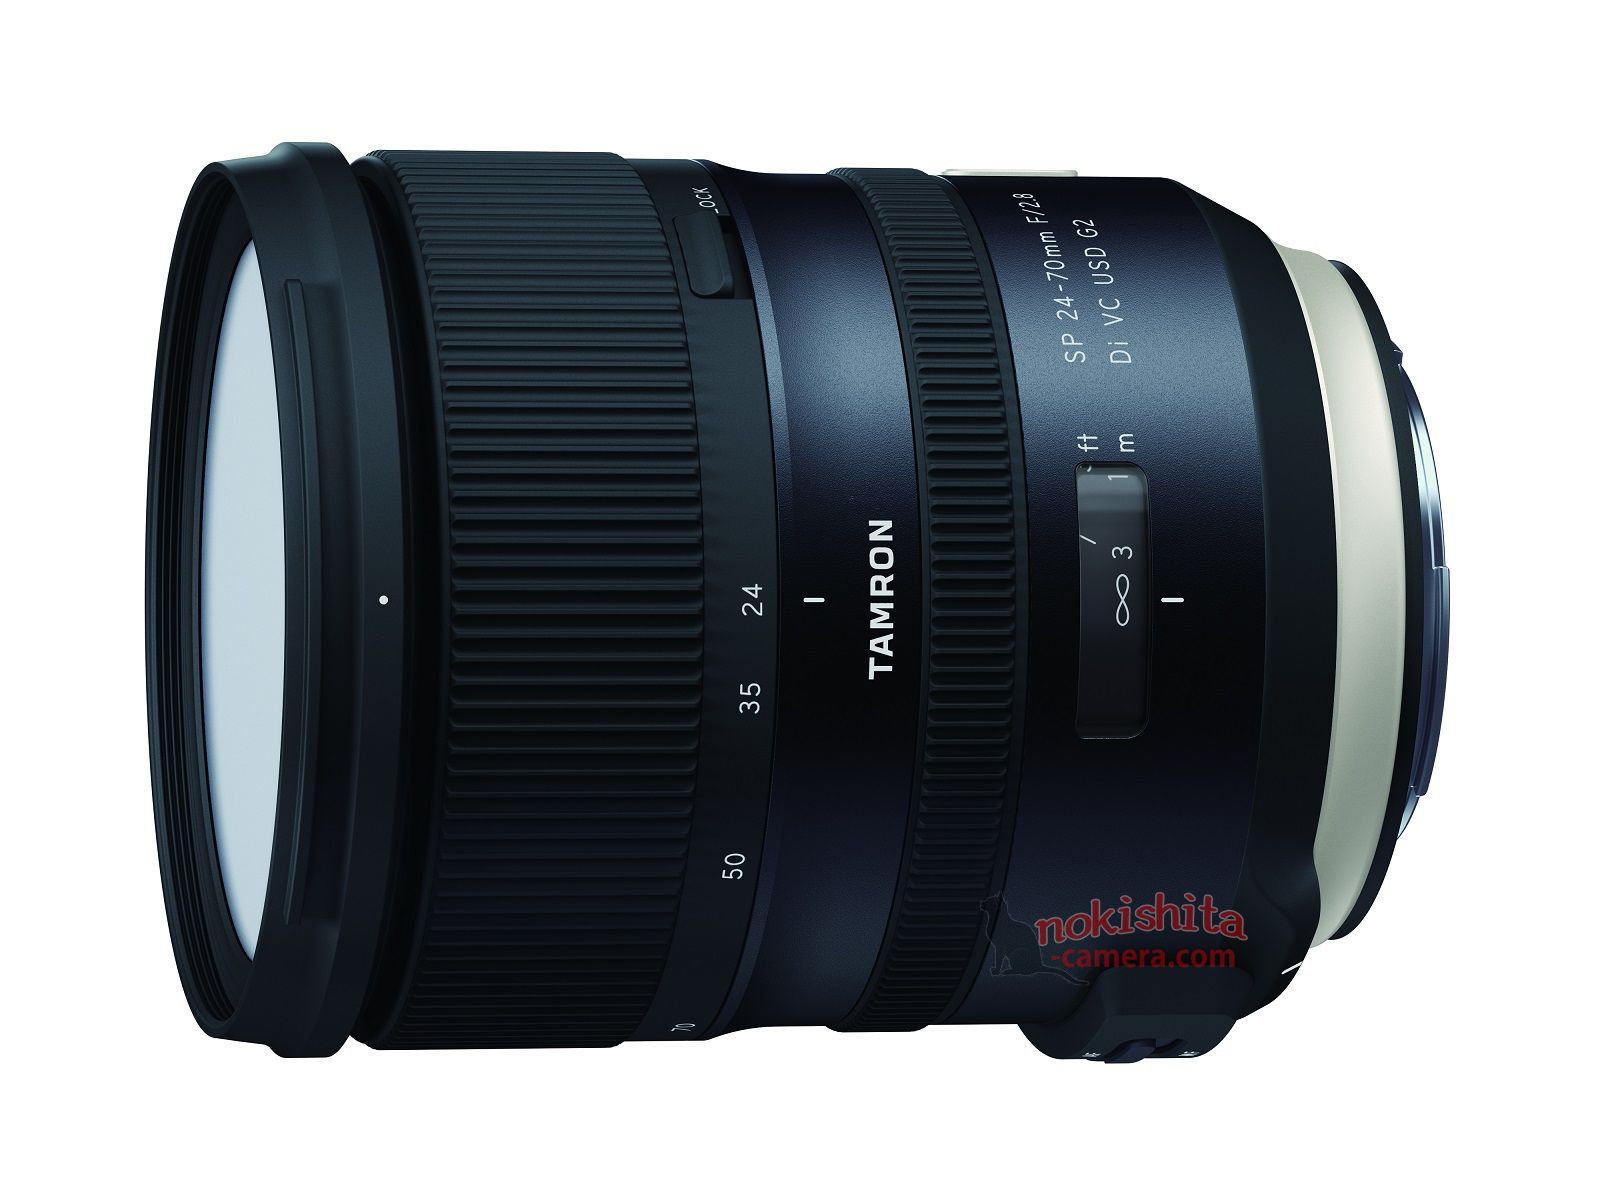 MasHD : Tamron SP 24 -70 mm f2.8 G 2 leaked before announcement